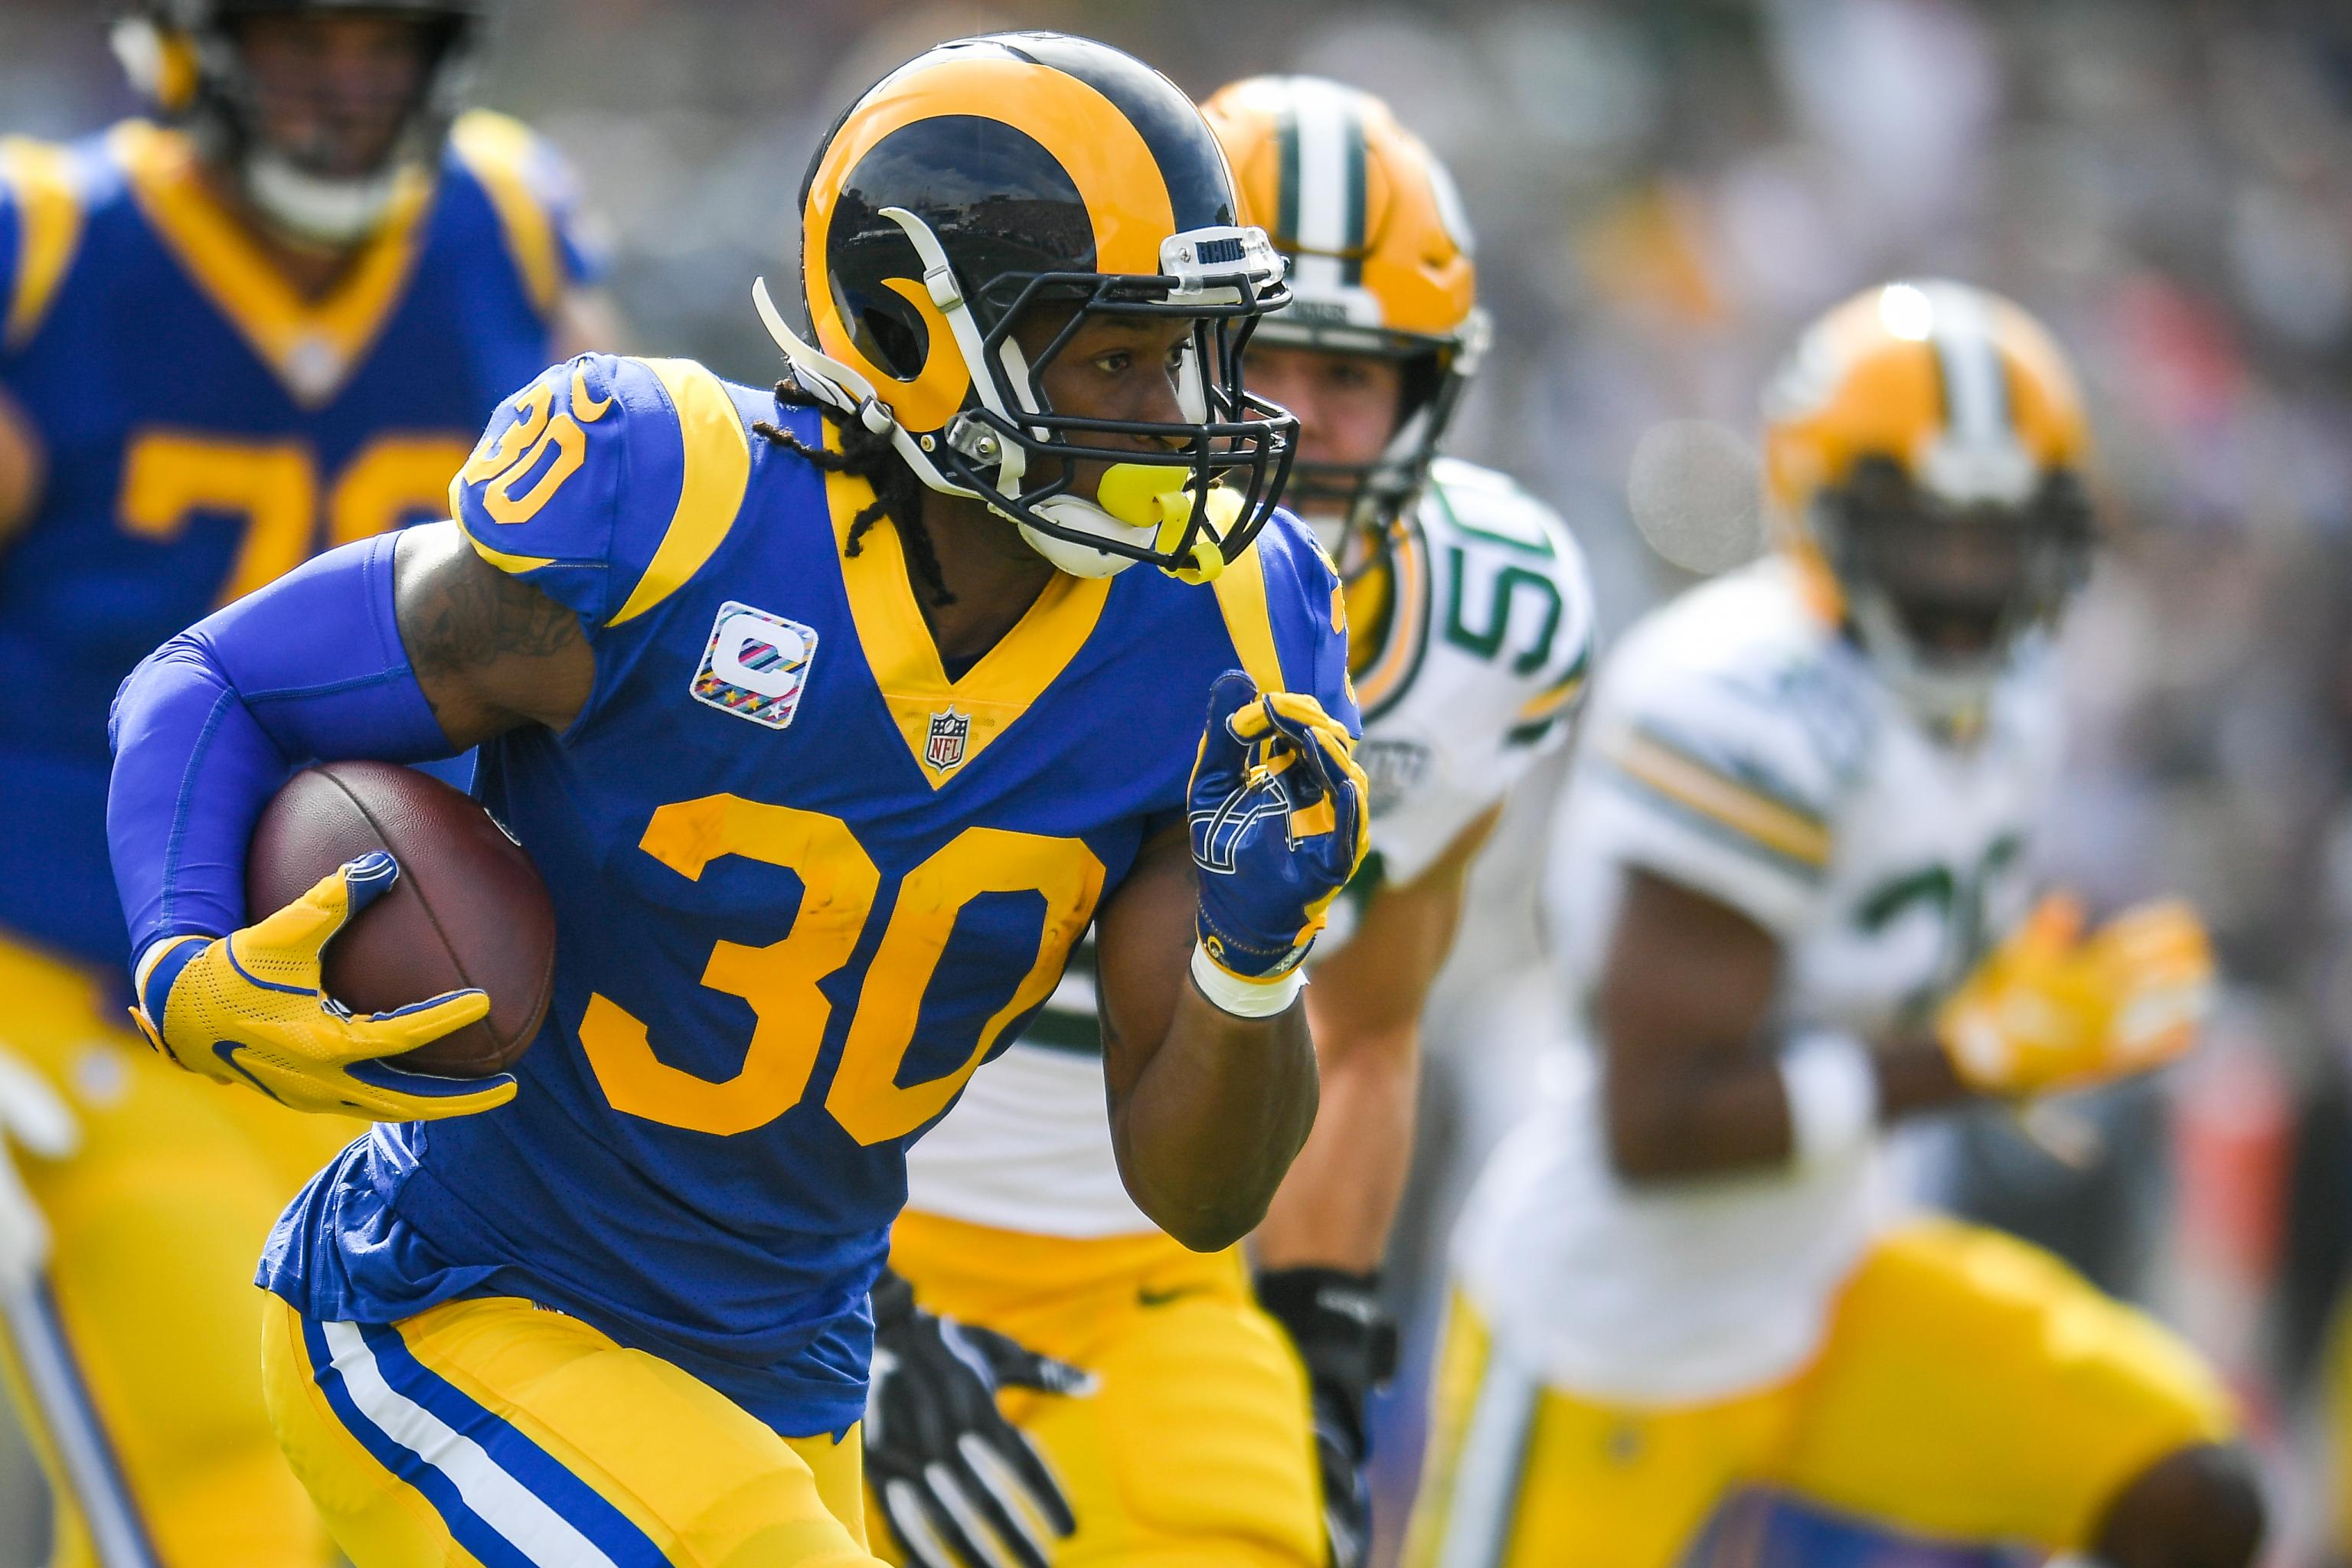 What Happened to Todd Gurley?